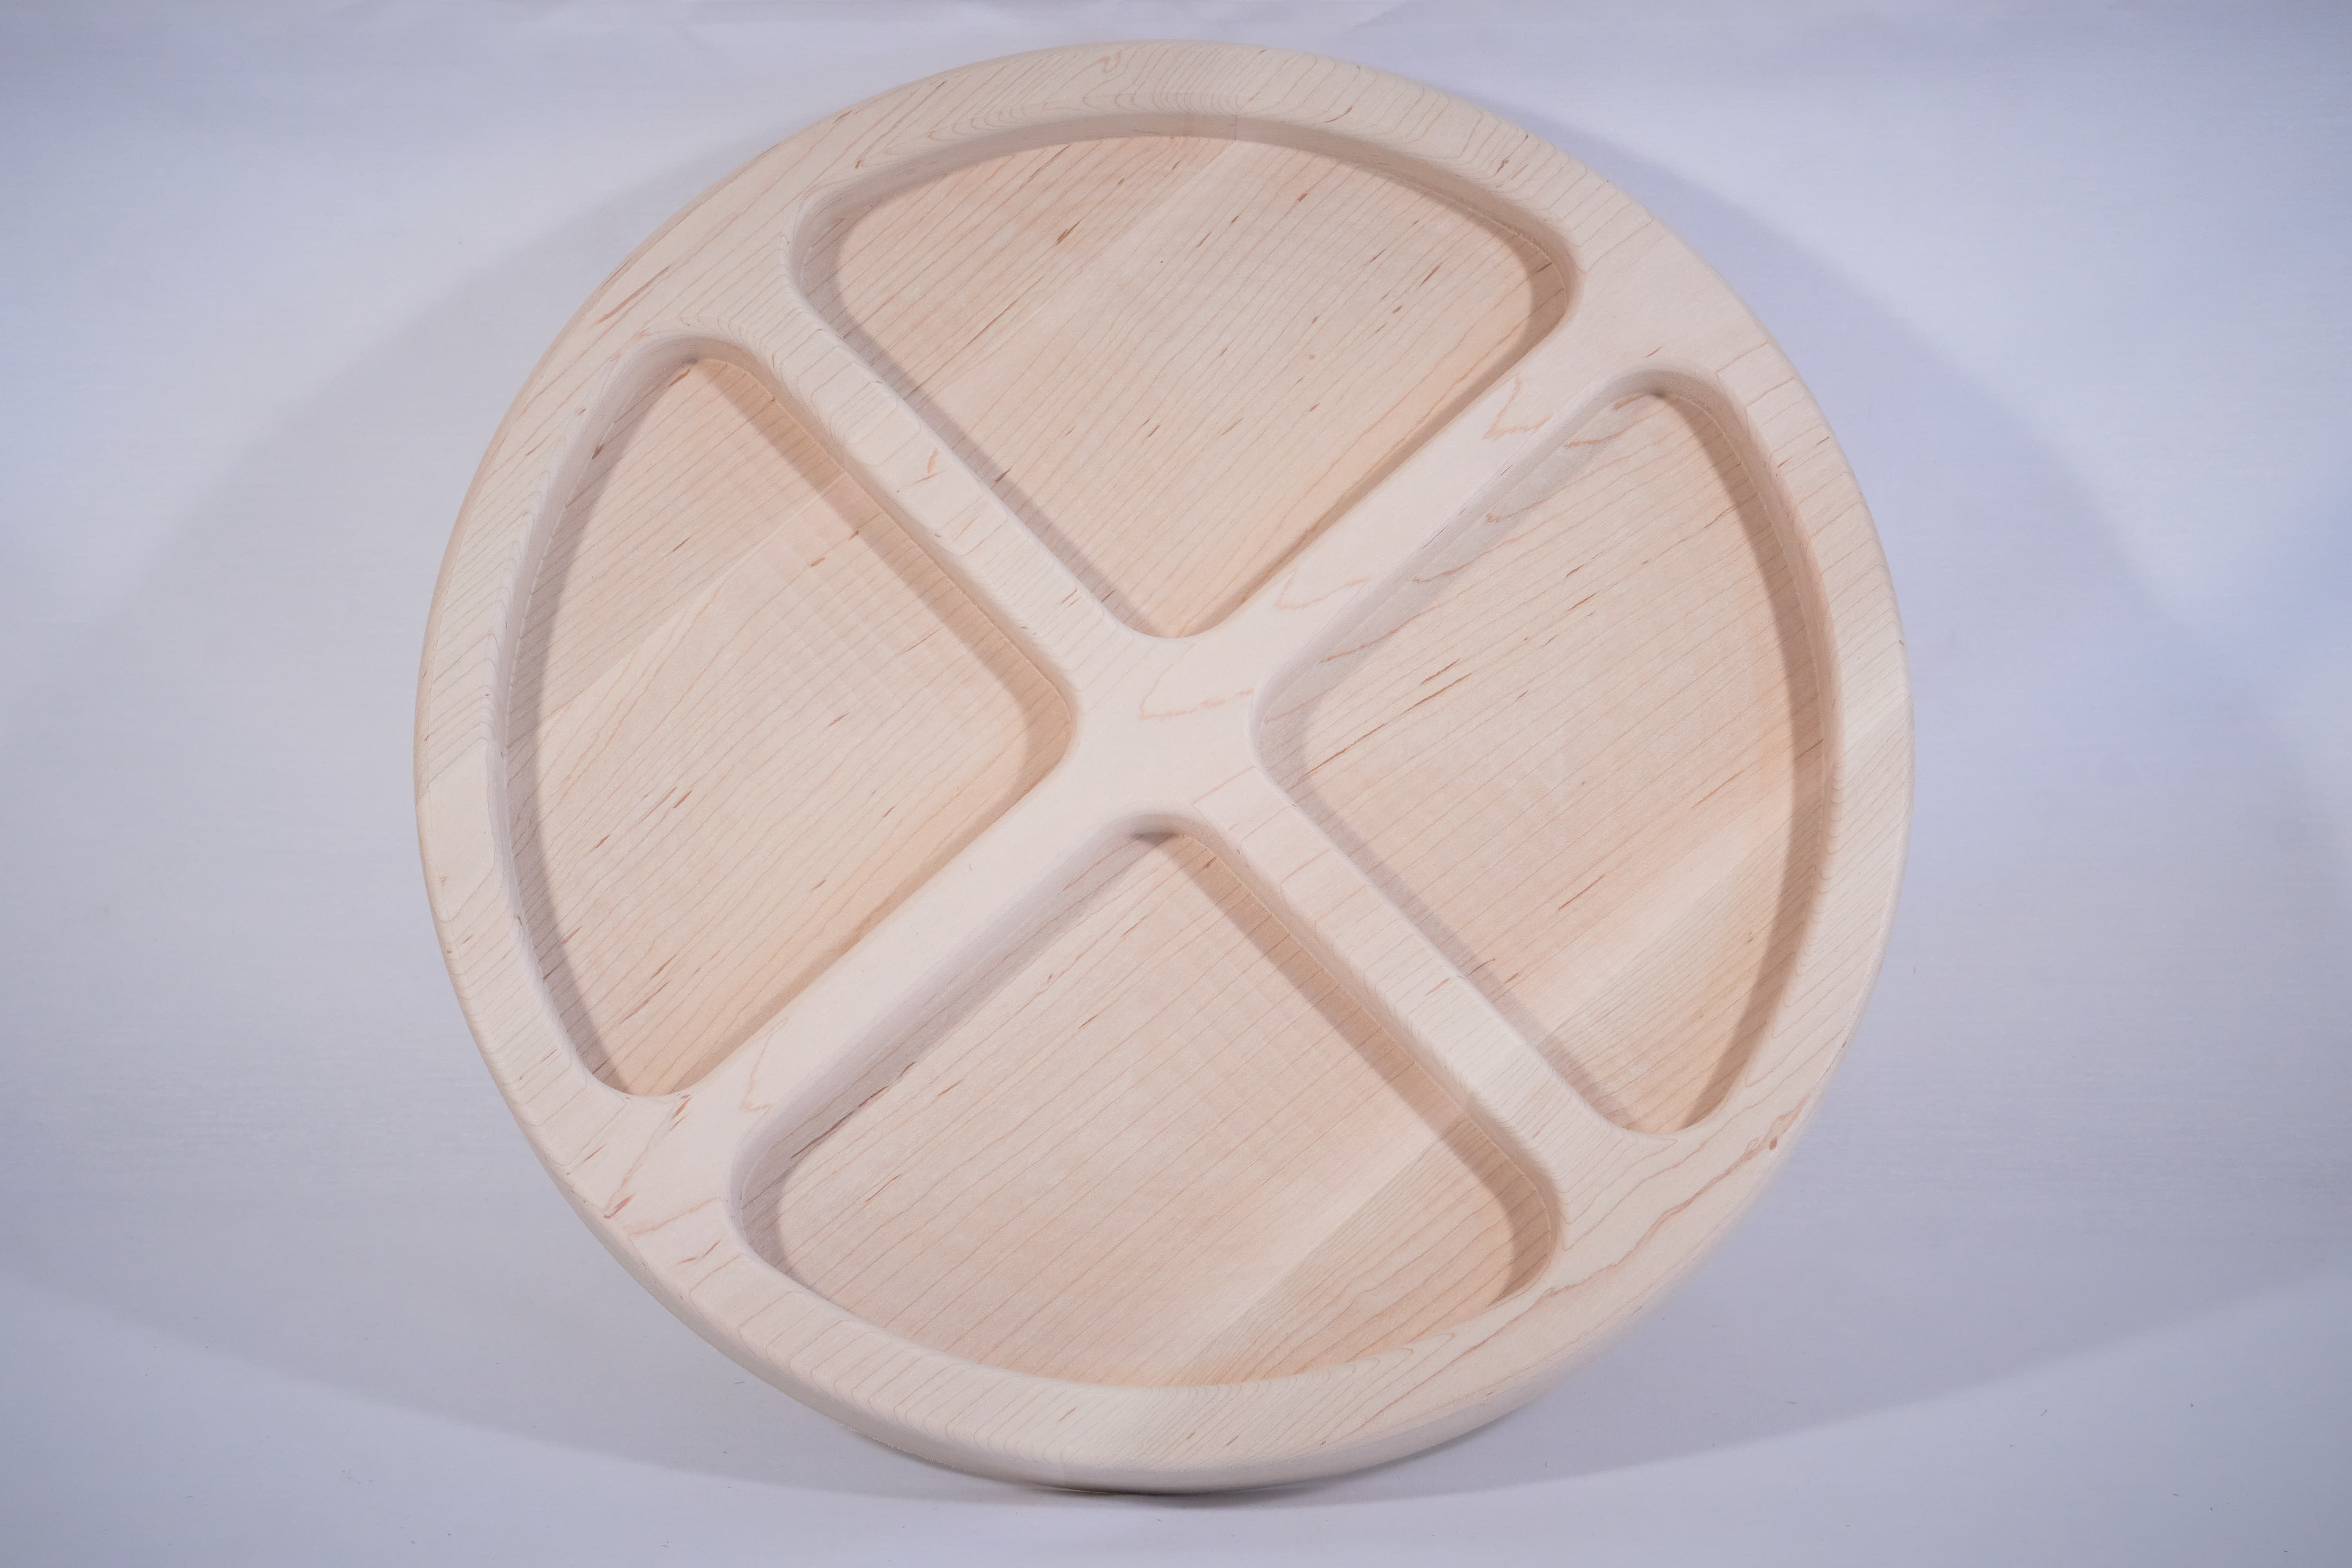 A piece of maple with pockets milled by a CNC machine